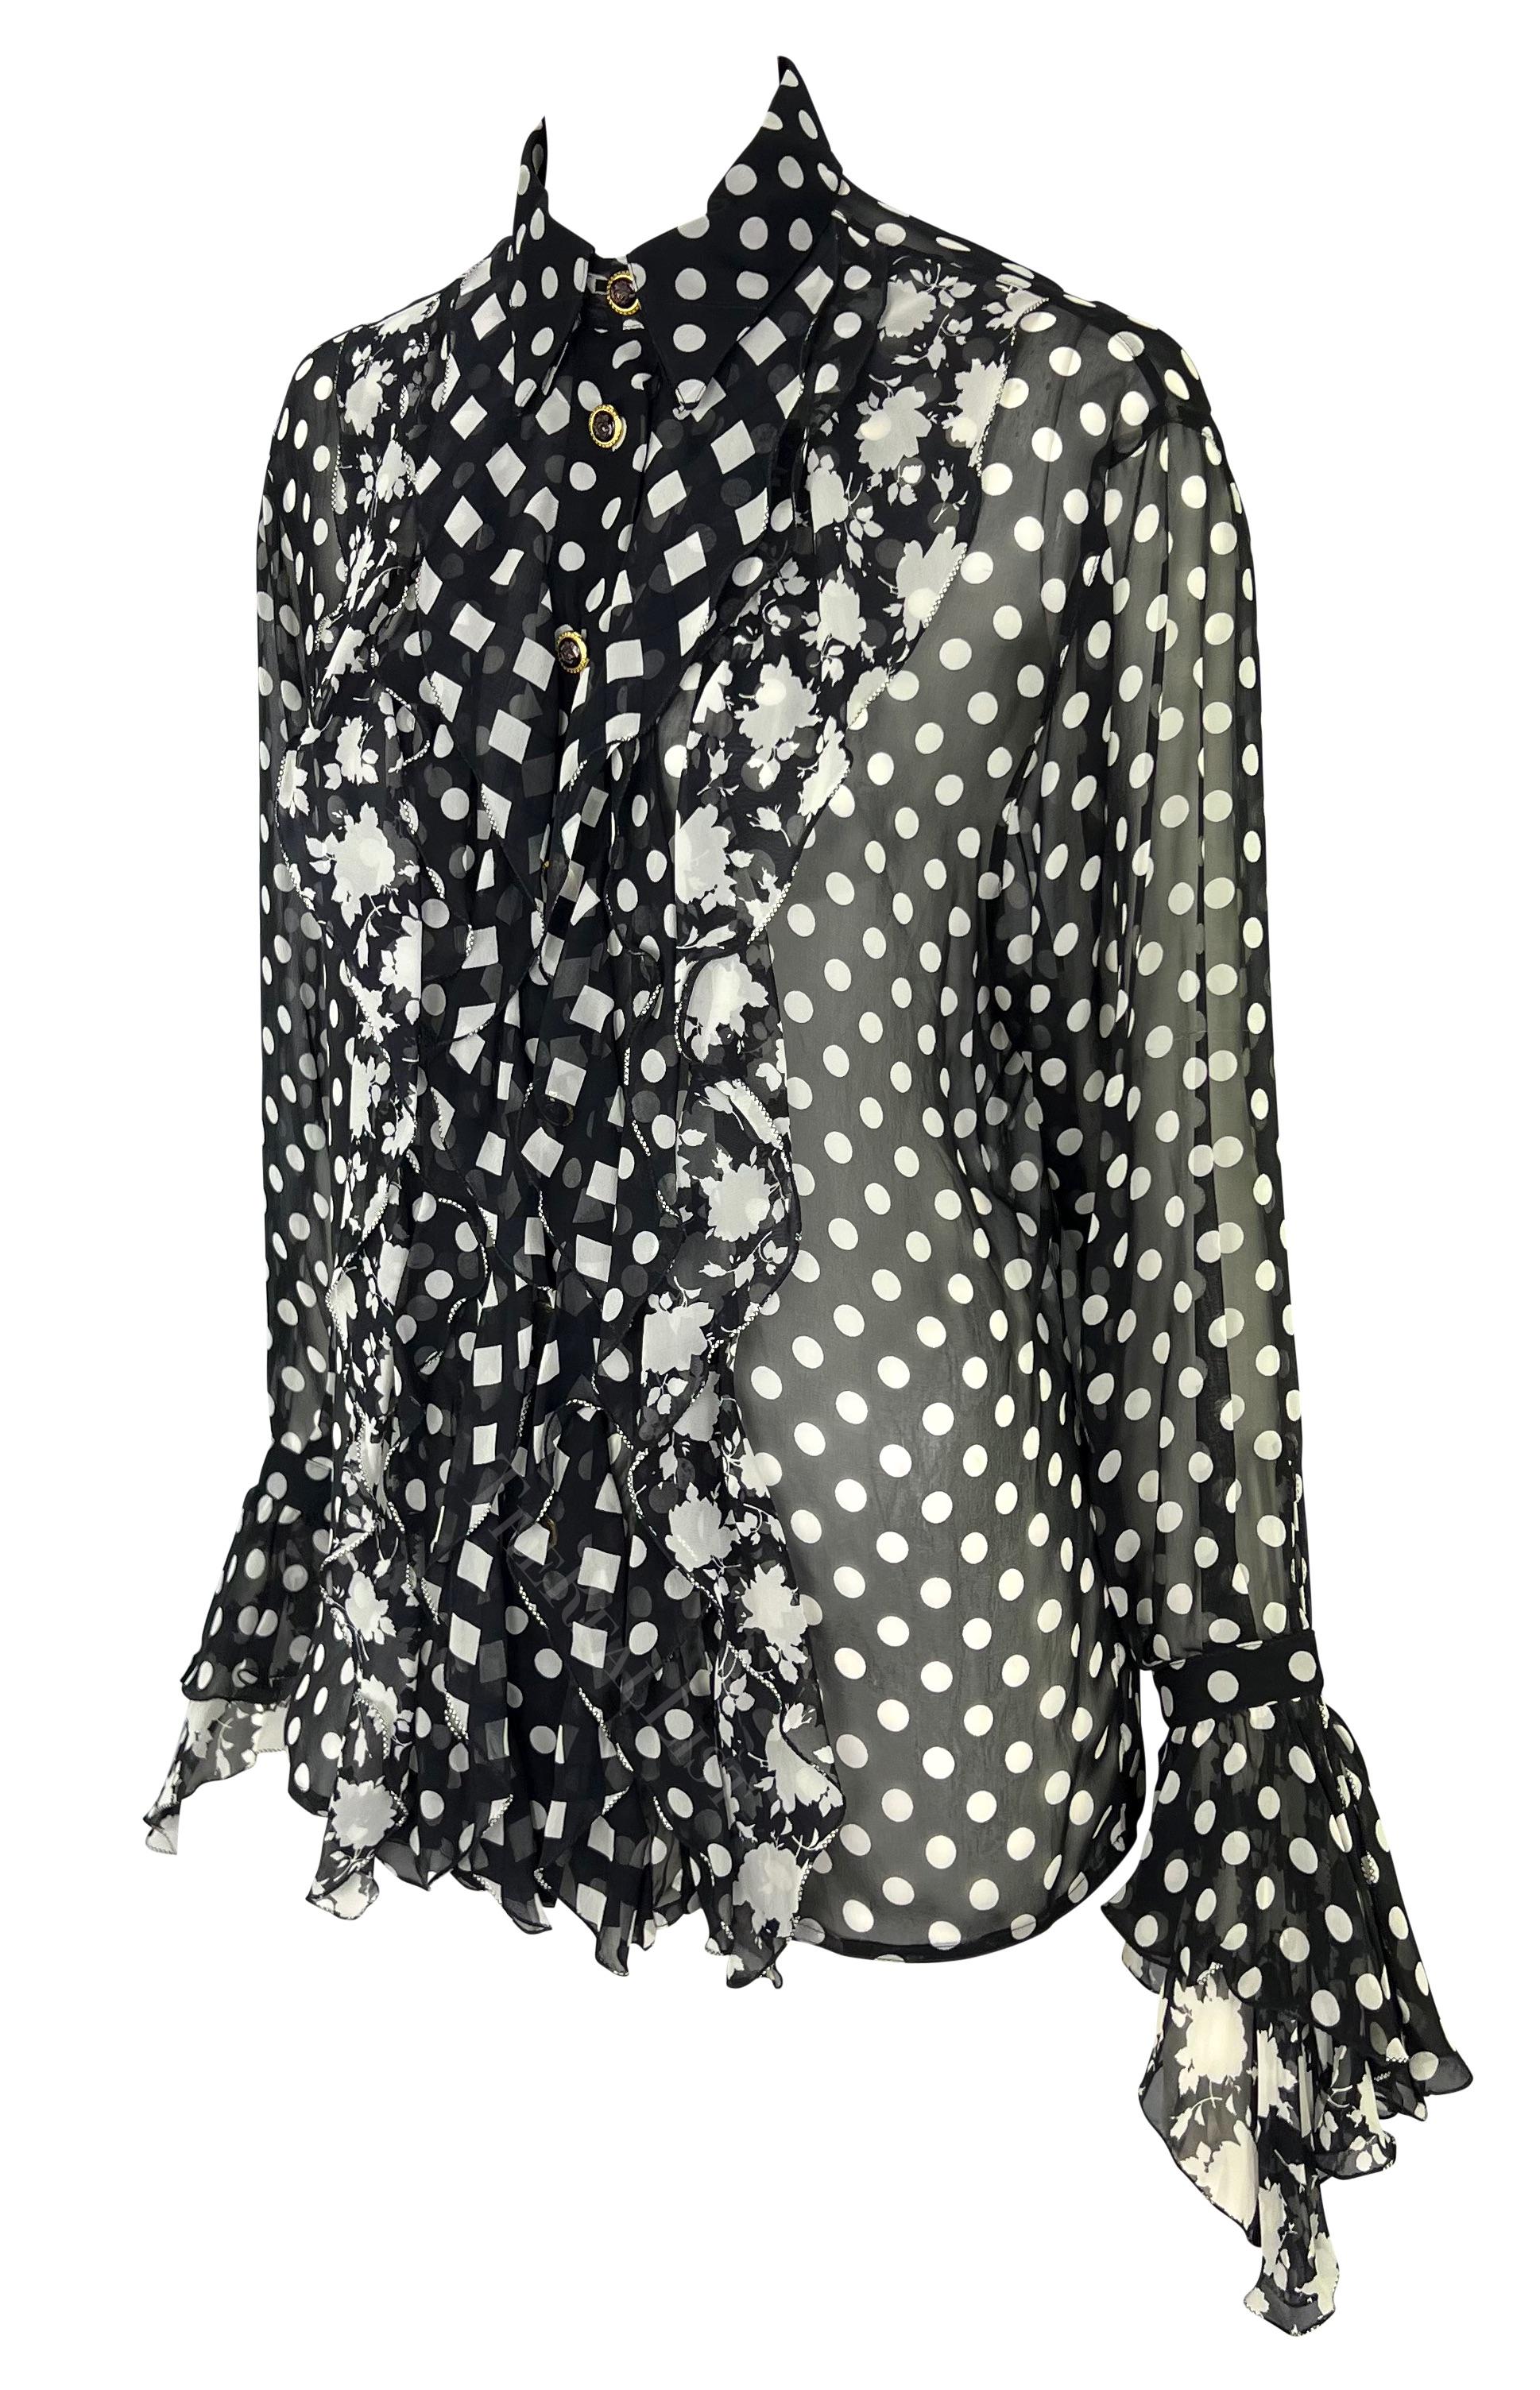 S/S 1993 Gianni Versace Runway Black White Sheer Polka Dot Floral Ruffle Top In Excellent Condition For Sale In West Hollywood, CA